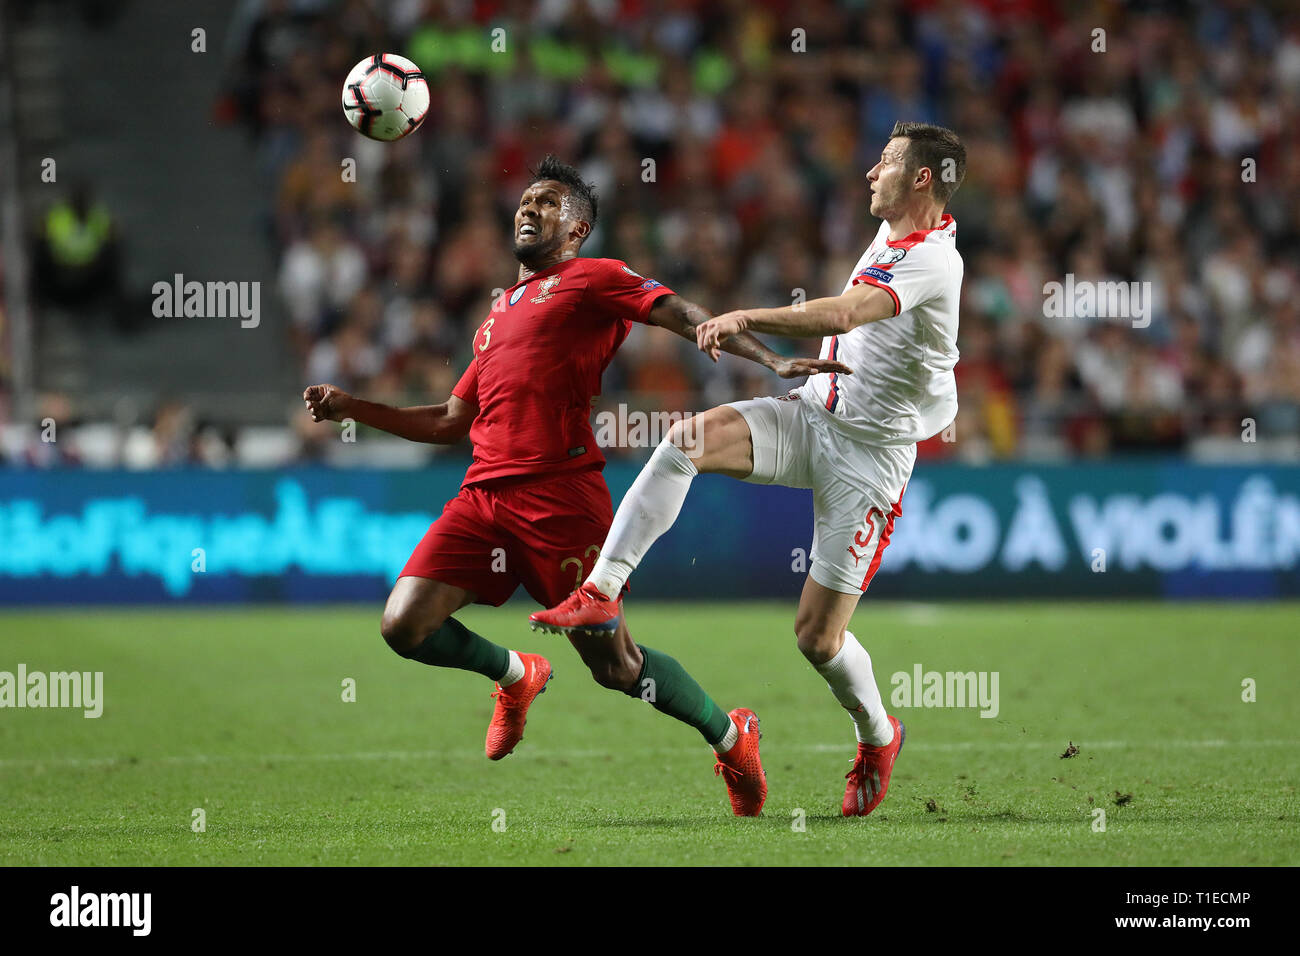 Dyego Sousa of Portugal (L) vies for the ball with Uroš Spaji? of Serbia (R) during the Qualifiers - Group B to Euro 2020 football match between Portugal vs Serbia. (Final score: Portugal 1 - 1 Serbia) Stock Photo